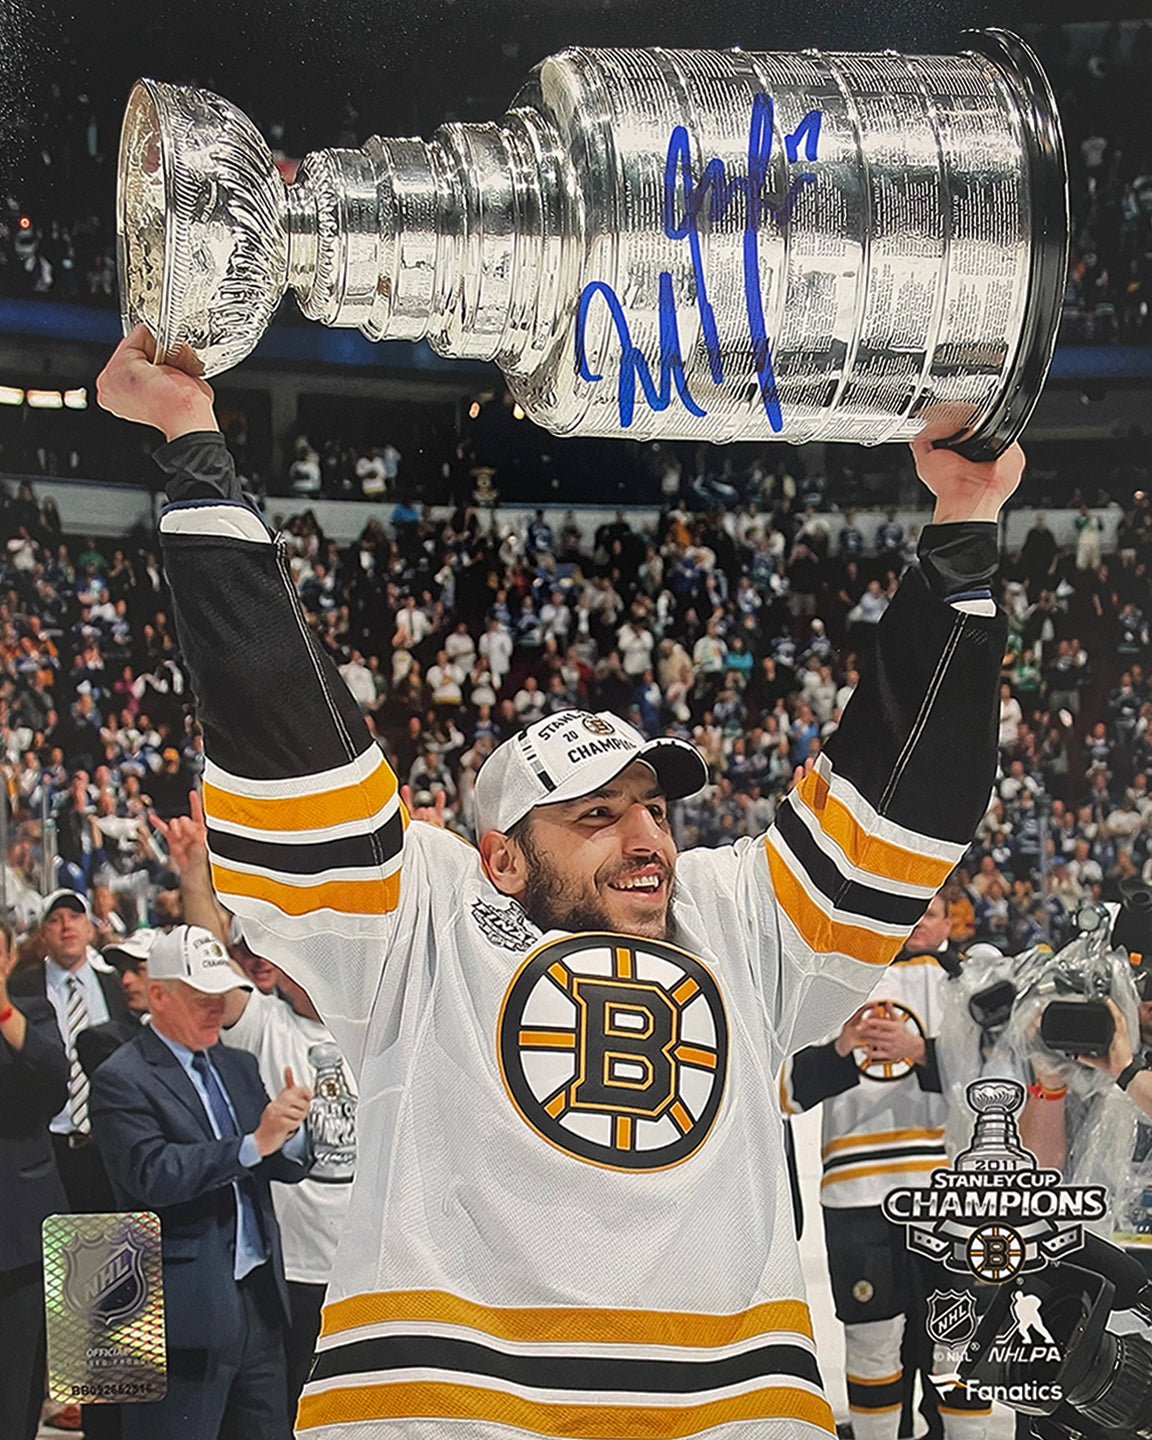 Milan Lucic 2011 Stanley Cup Boston Bruins Autographed 8" x 10" Hockey Photo